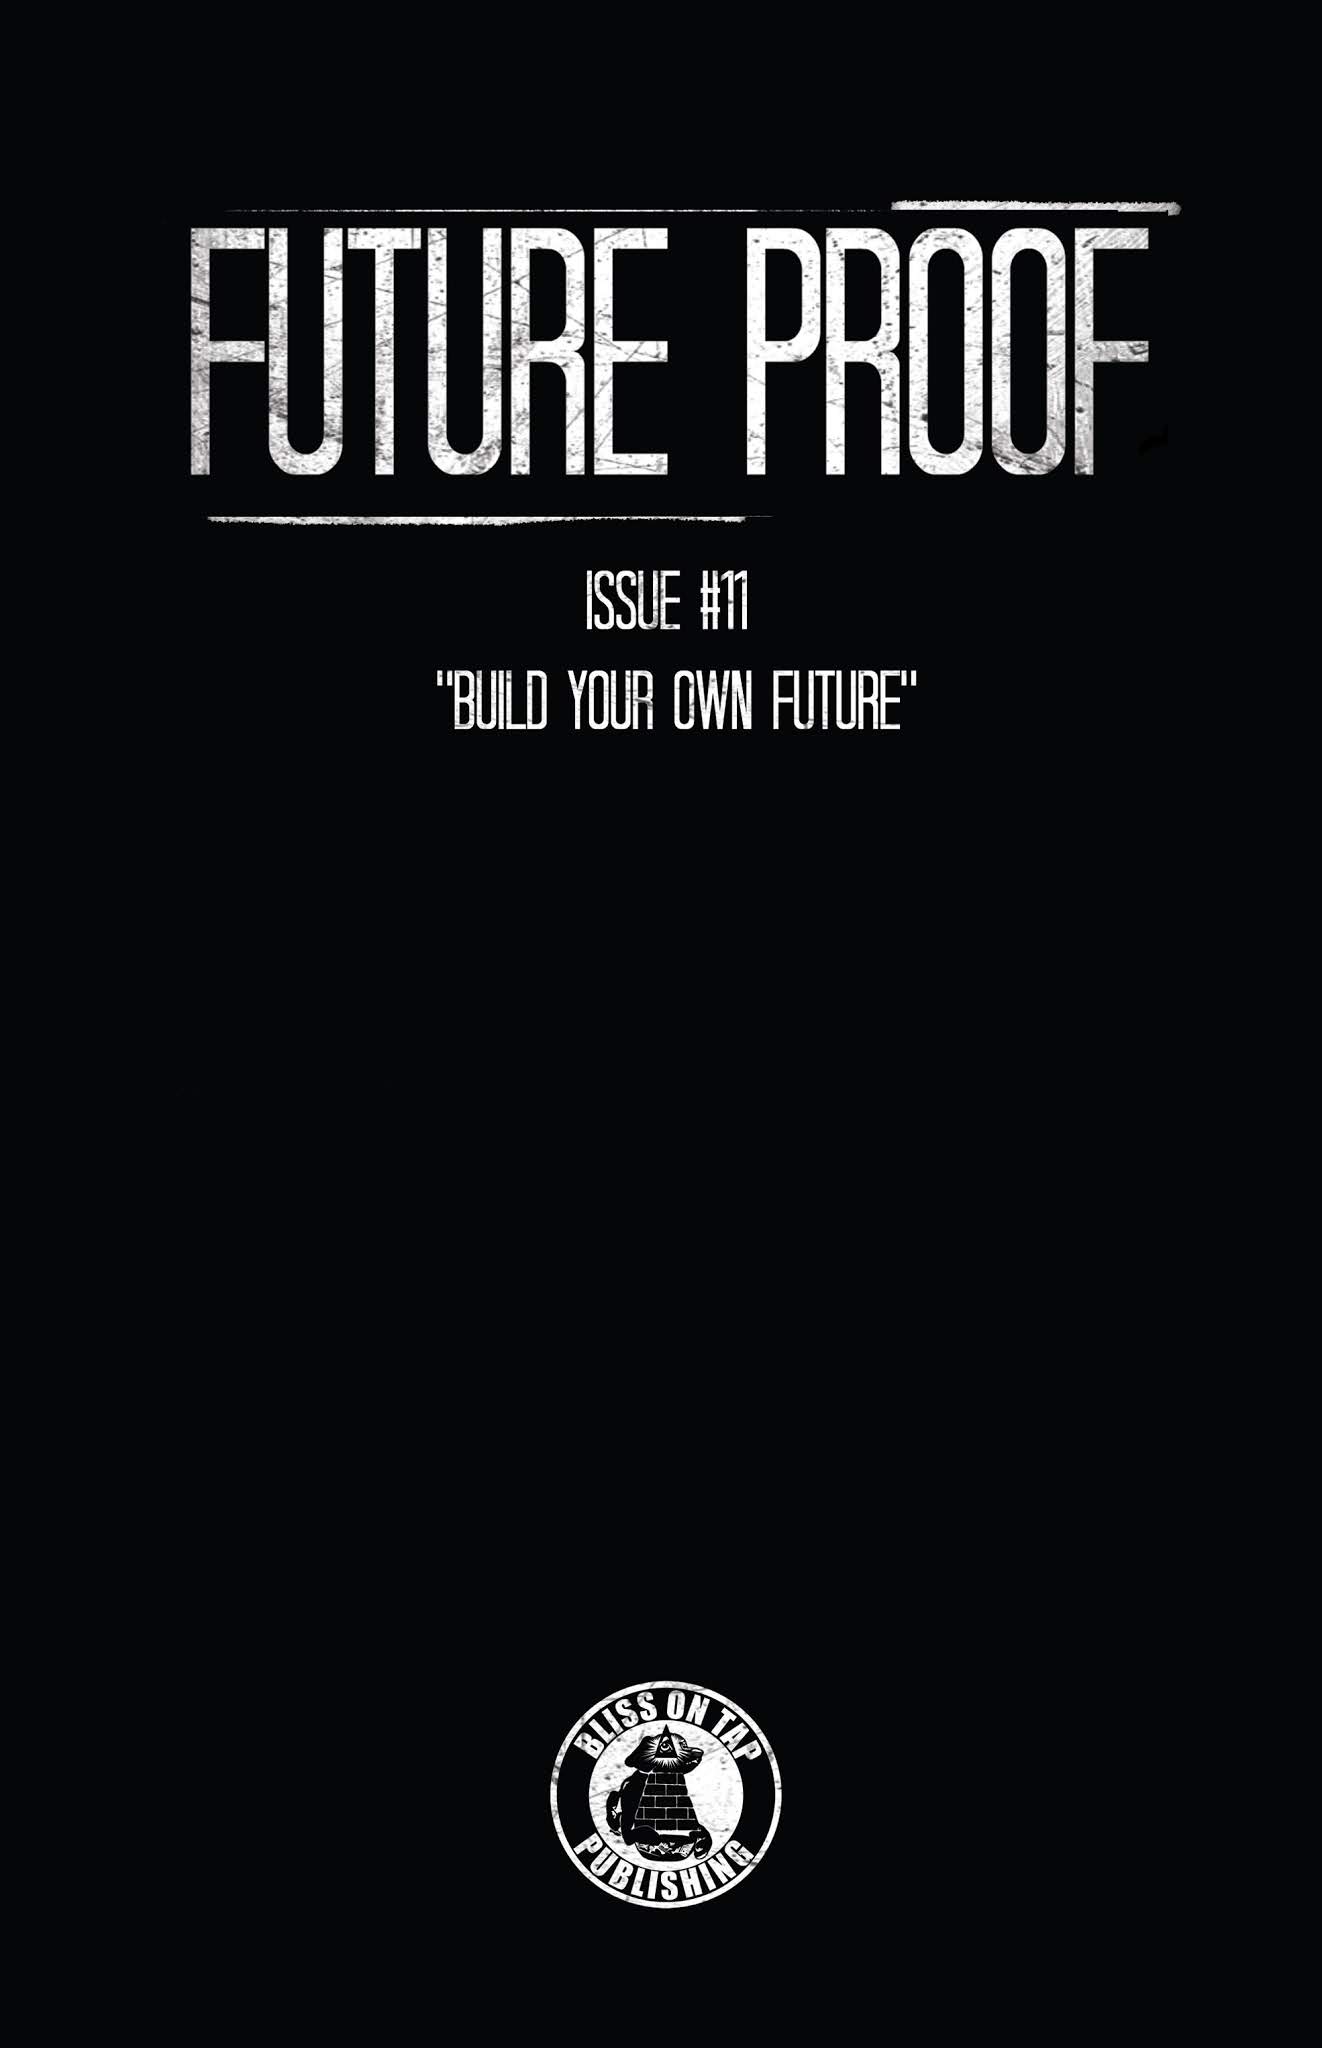 Read online Future Proof comic -  Issue #11 - 2